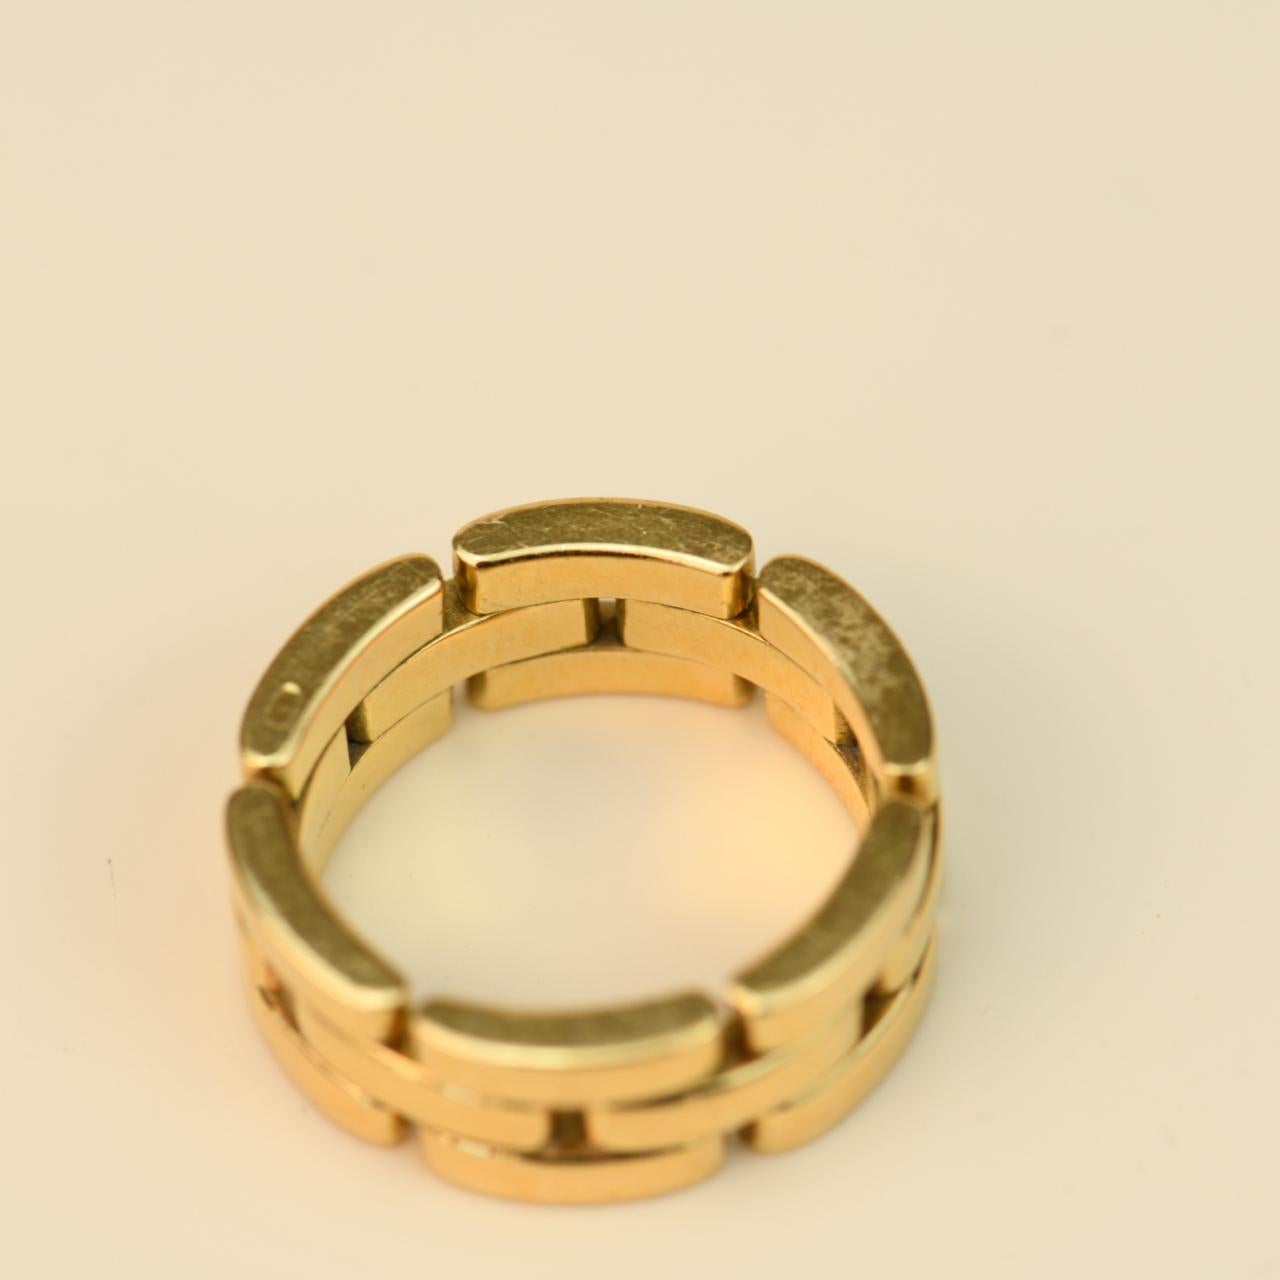 Brilliant Cut Cartier Maillon Panthere Yellow Gold Ring Size 52